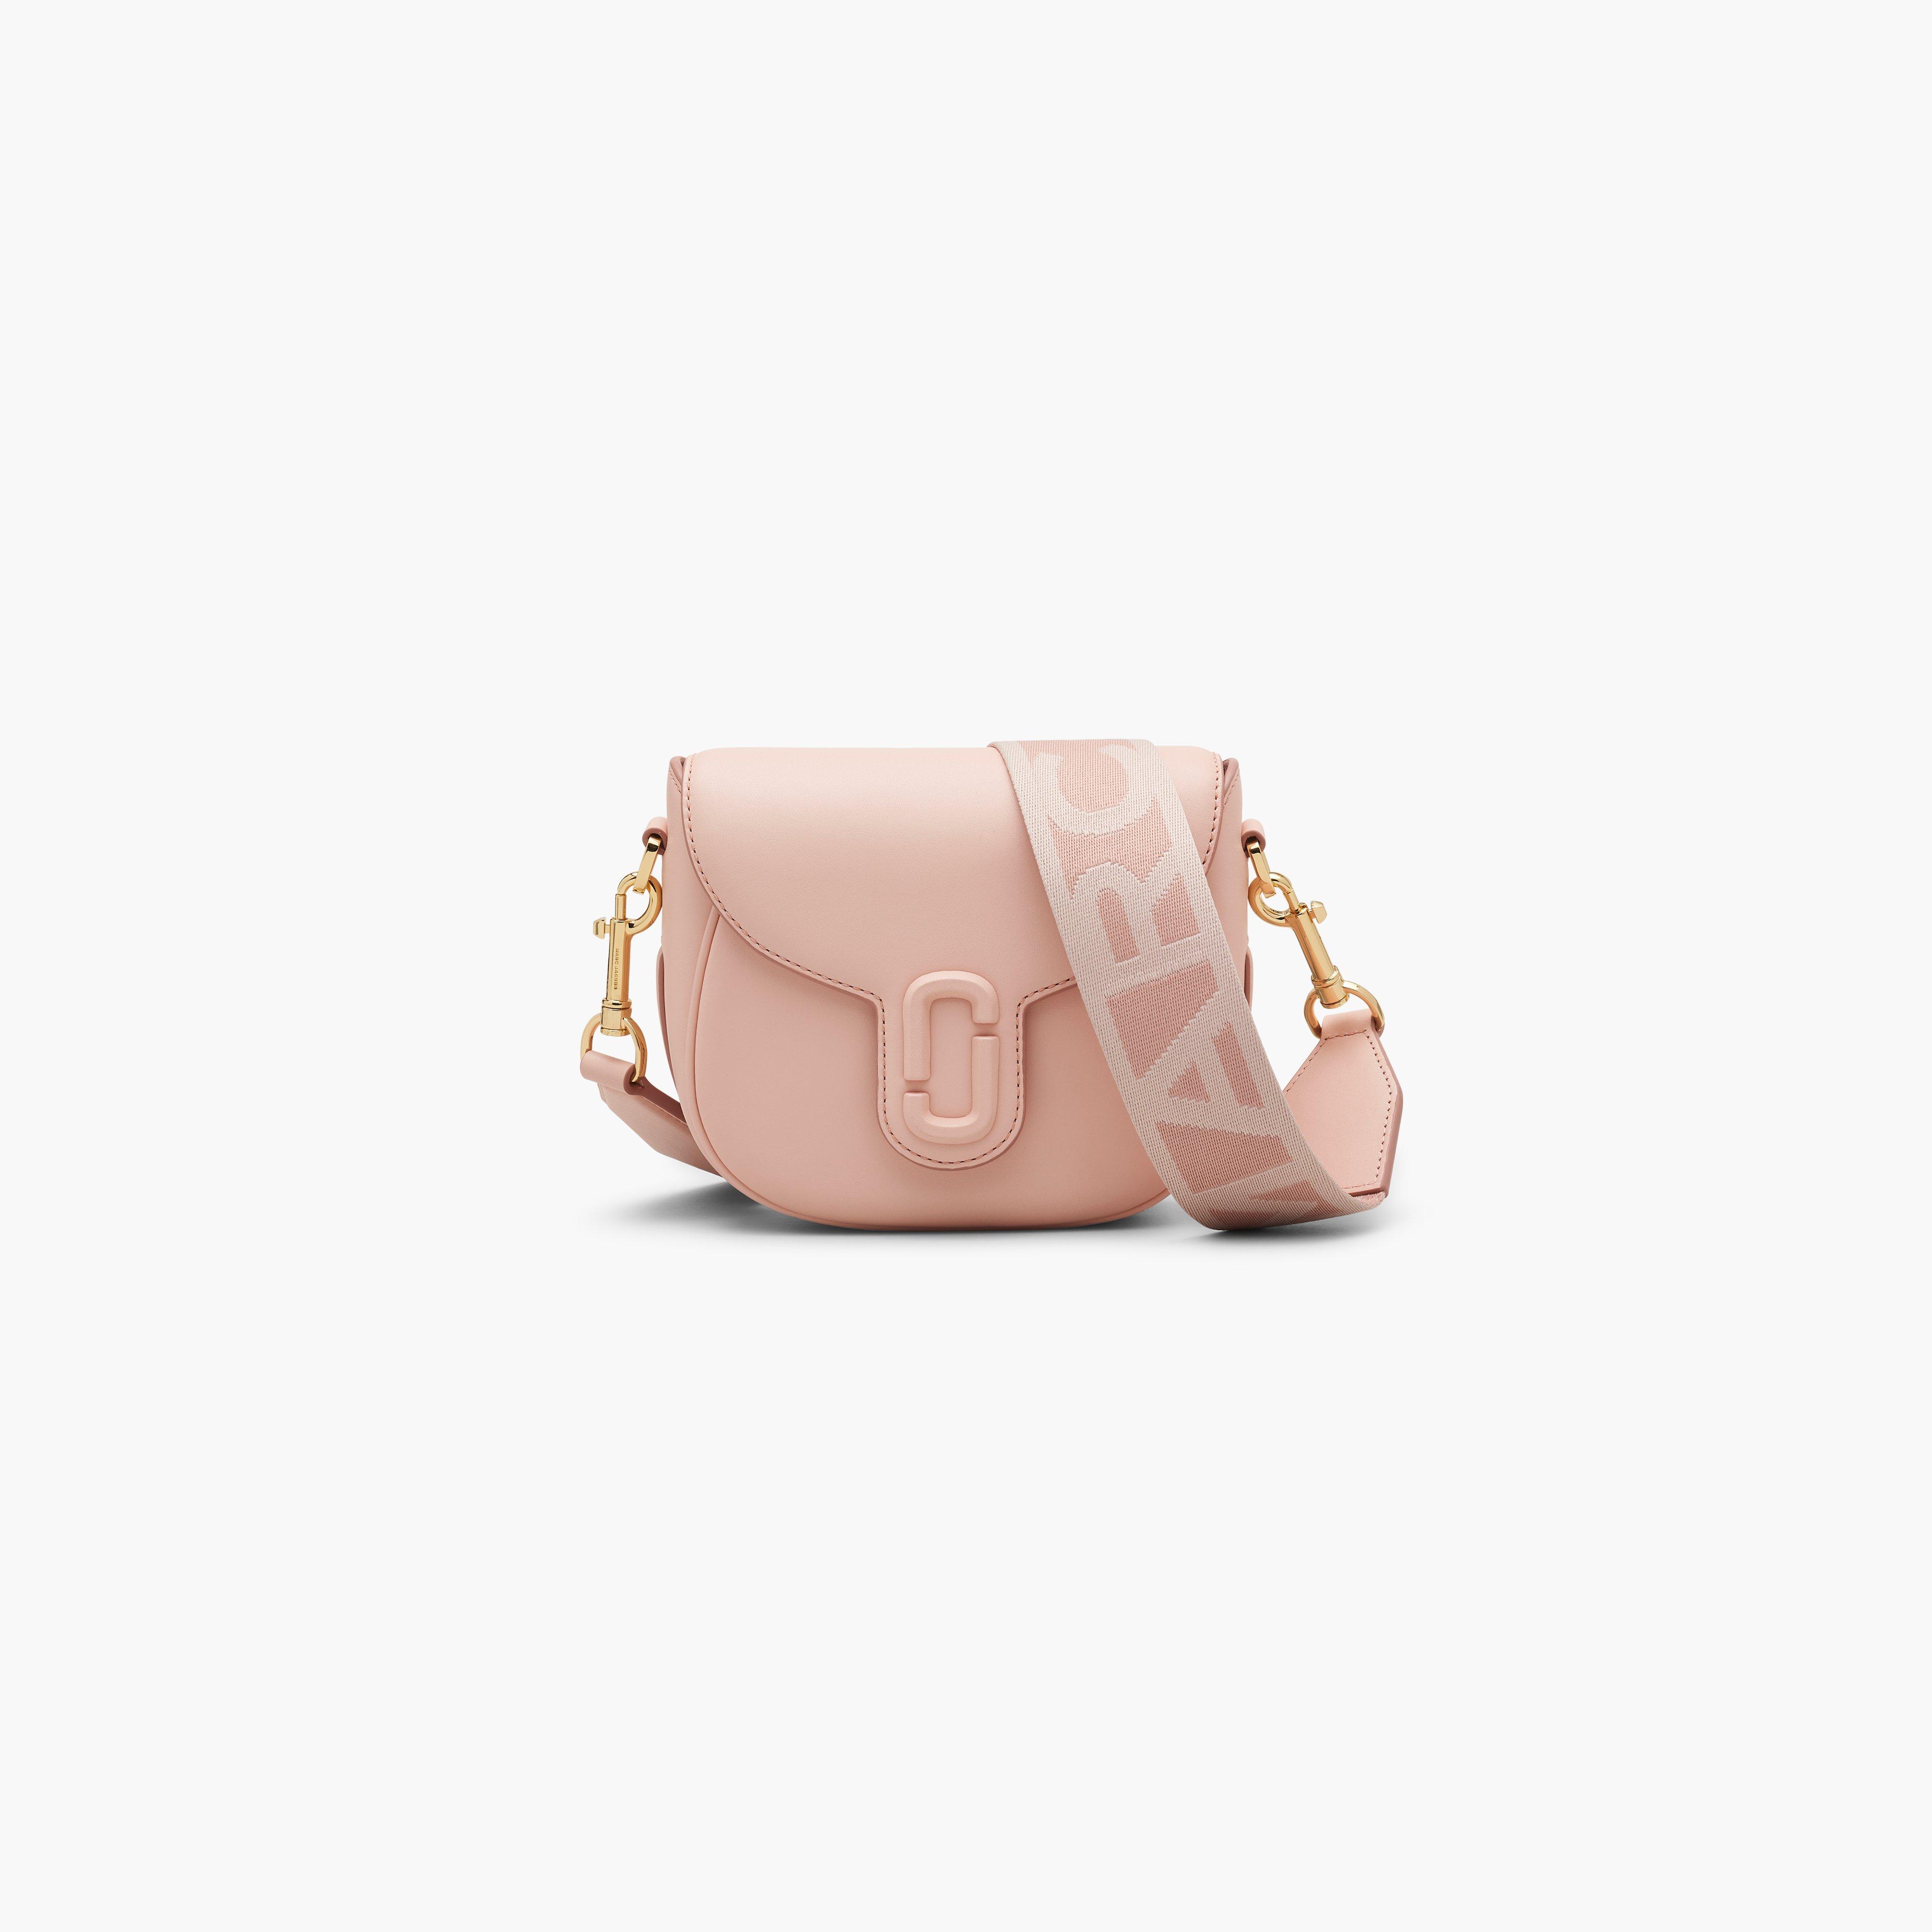 Marc by Marc jacobs The J Marc Small Saddle Bag,ROSE